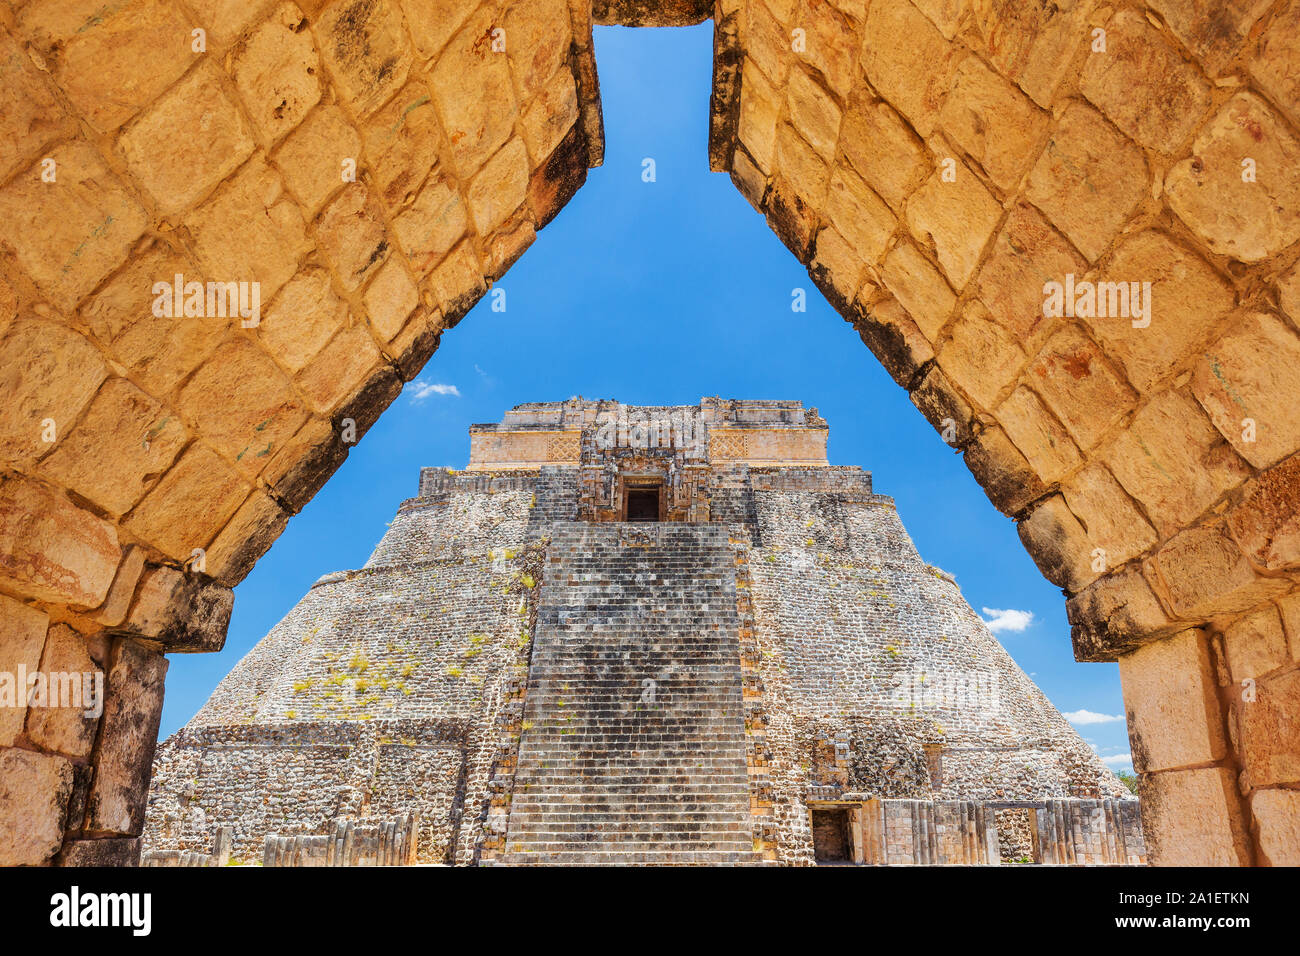 Uxmal, Mexico. Pyramid of the Magician in the ancient Mayan city. Stock Photo